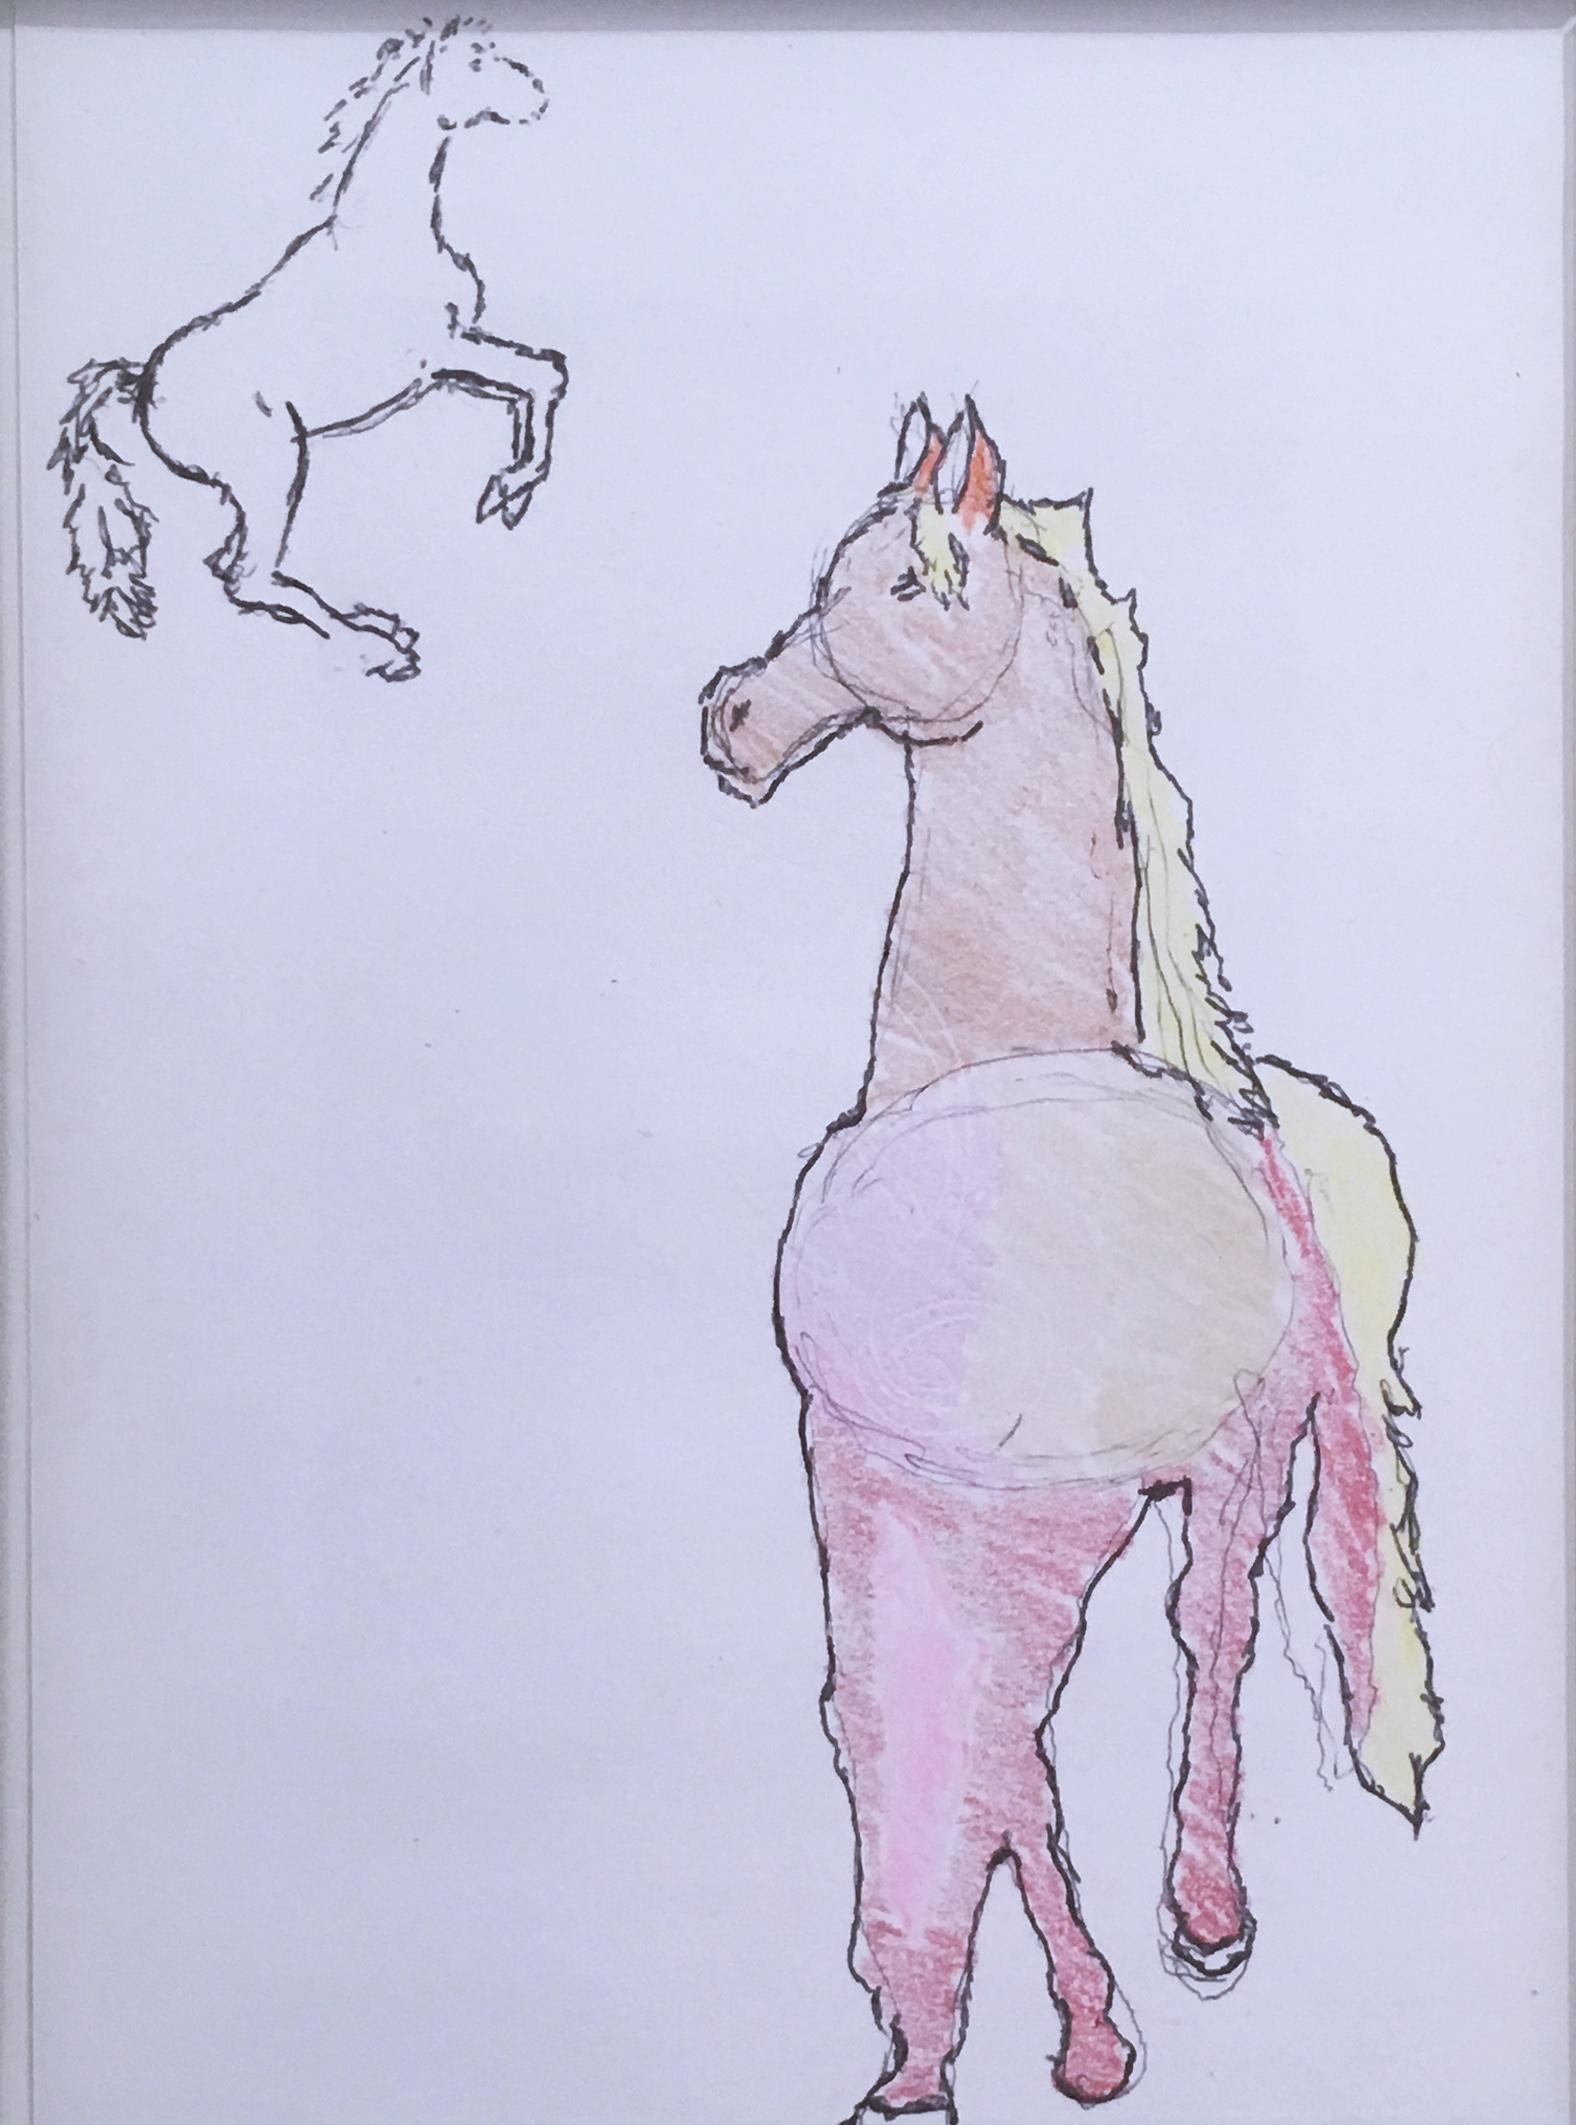 Horses, 2018, pen and crayon on paper, figurative, drawing, framed - Painting by Macauley Norman